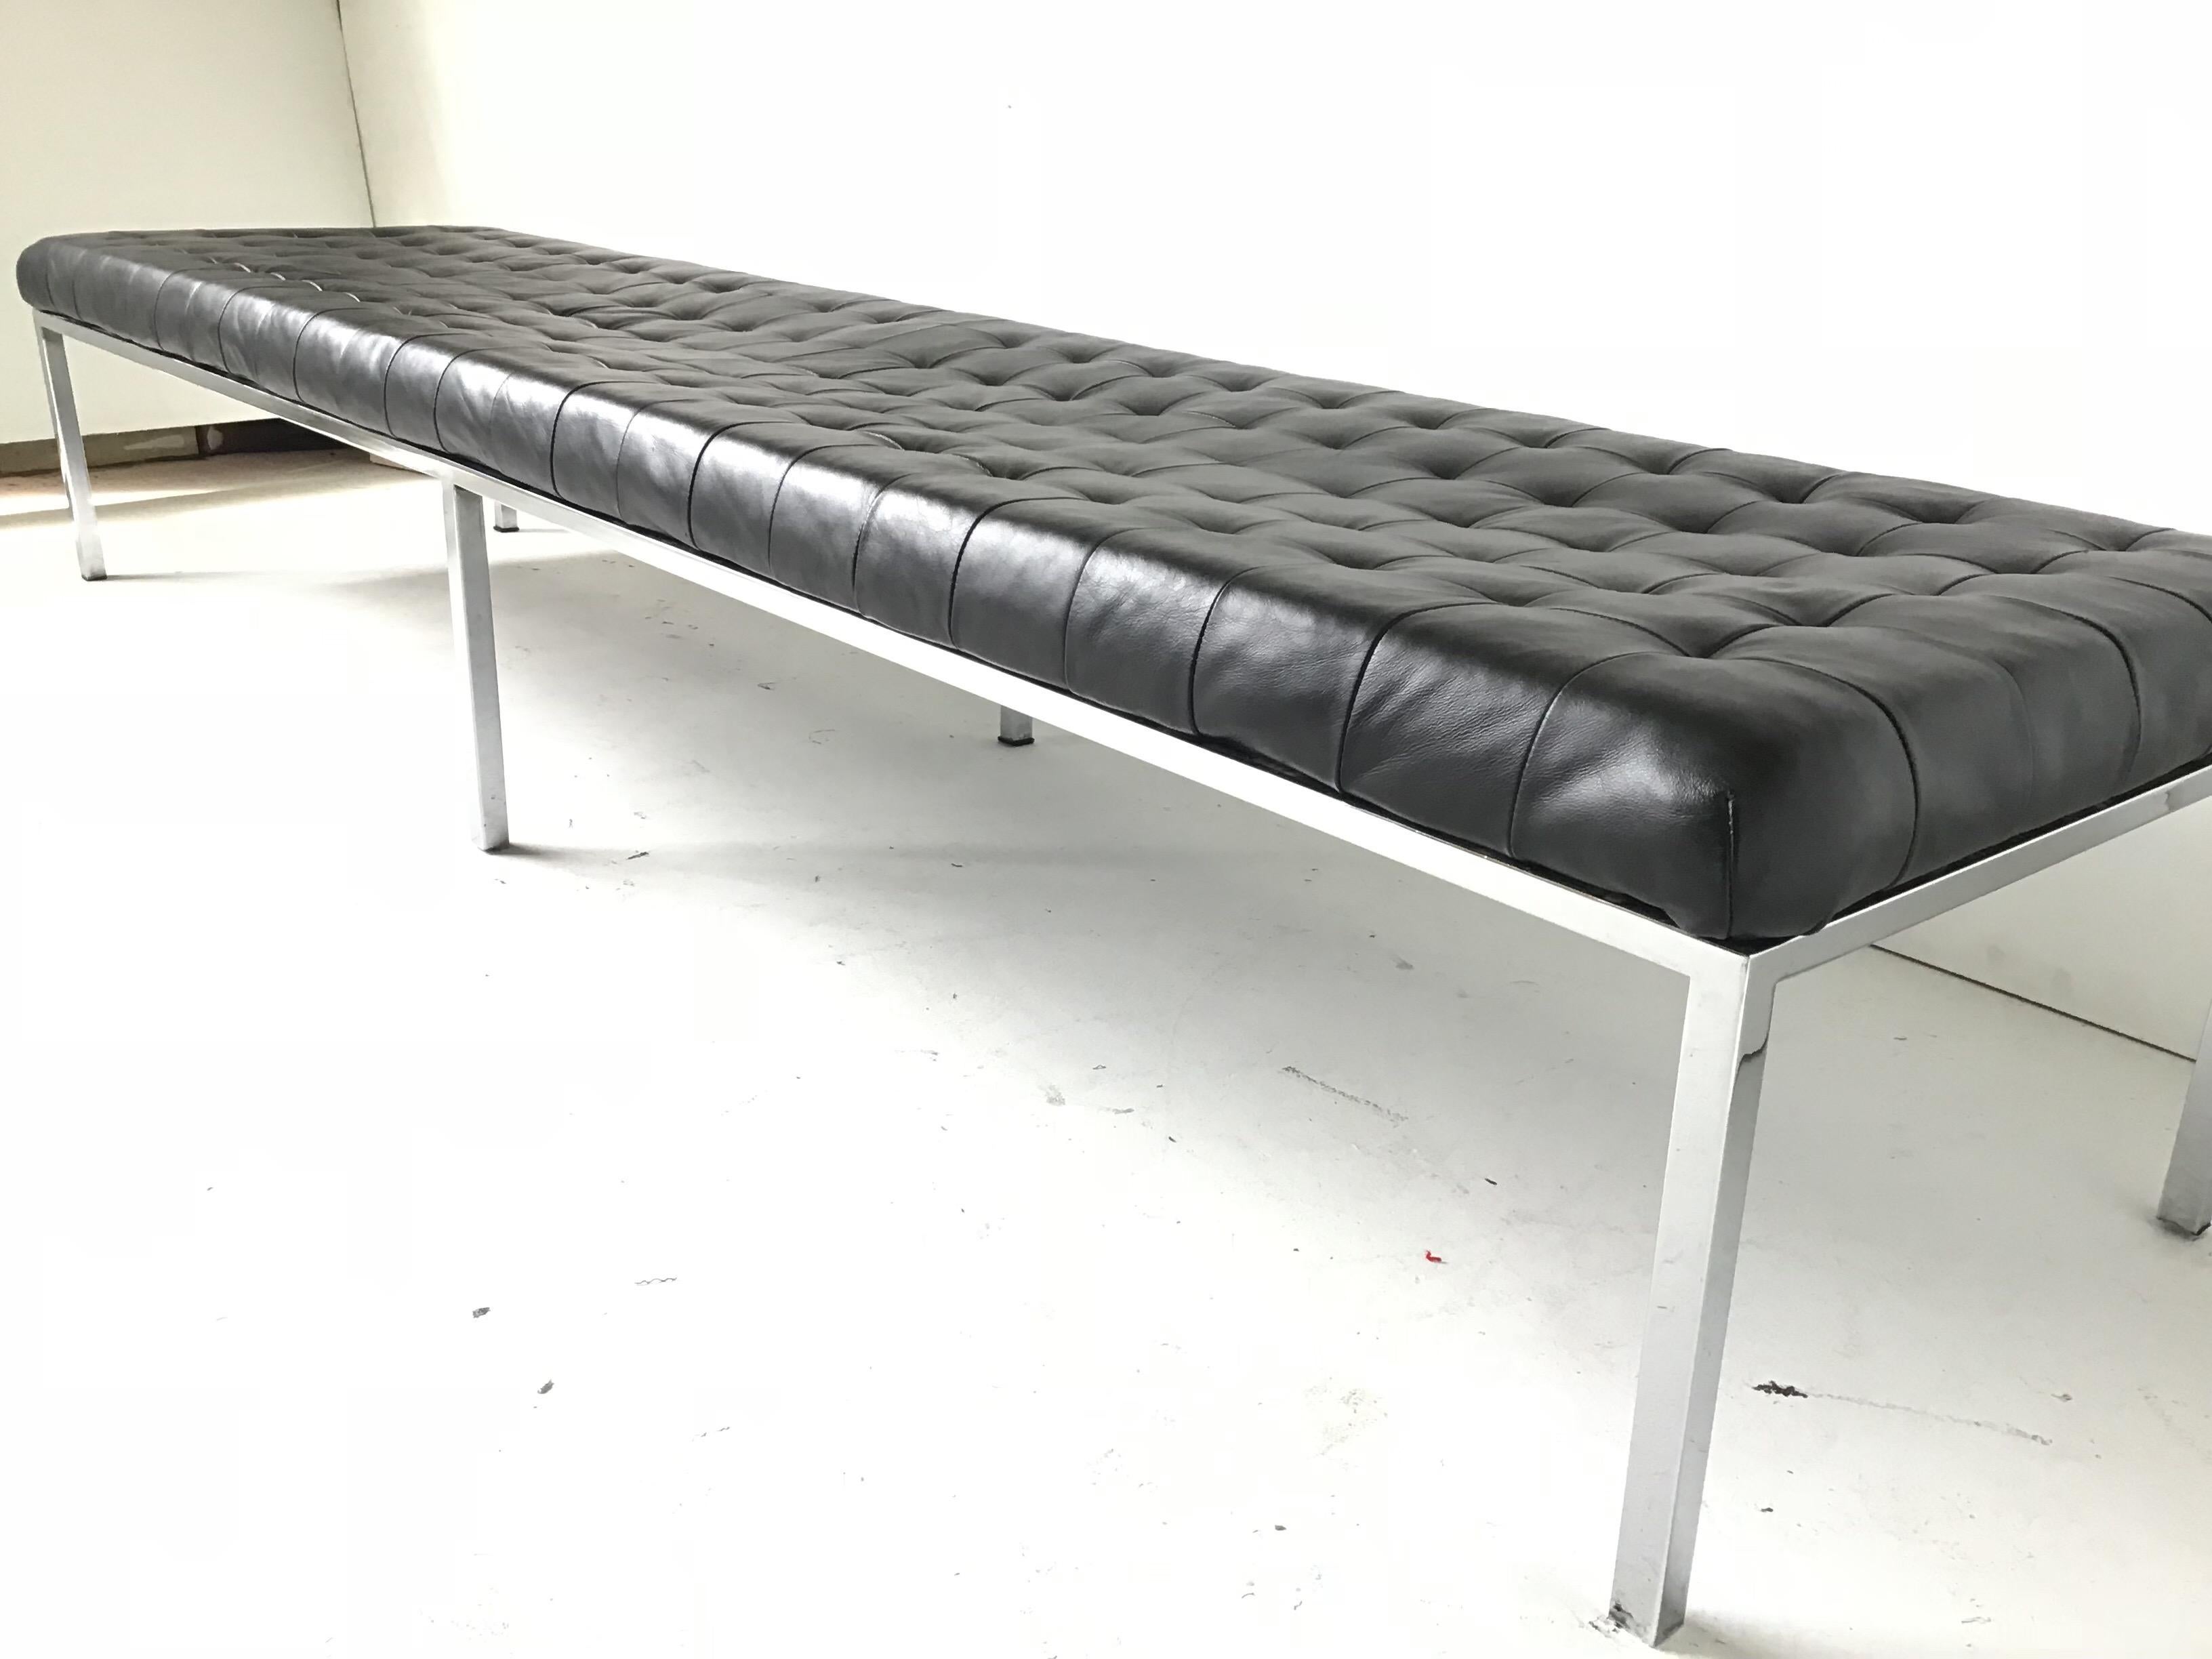 This is a vintage modern bench from circa 1970. It is manufactured by metropolitan. This bench is very similar to the Knoll benches. It has perfectly patinated black leather stitched in squares. The chrome is very clean. There is one hairline to the